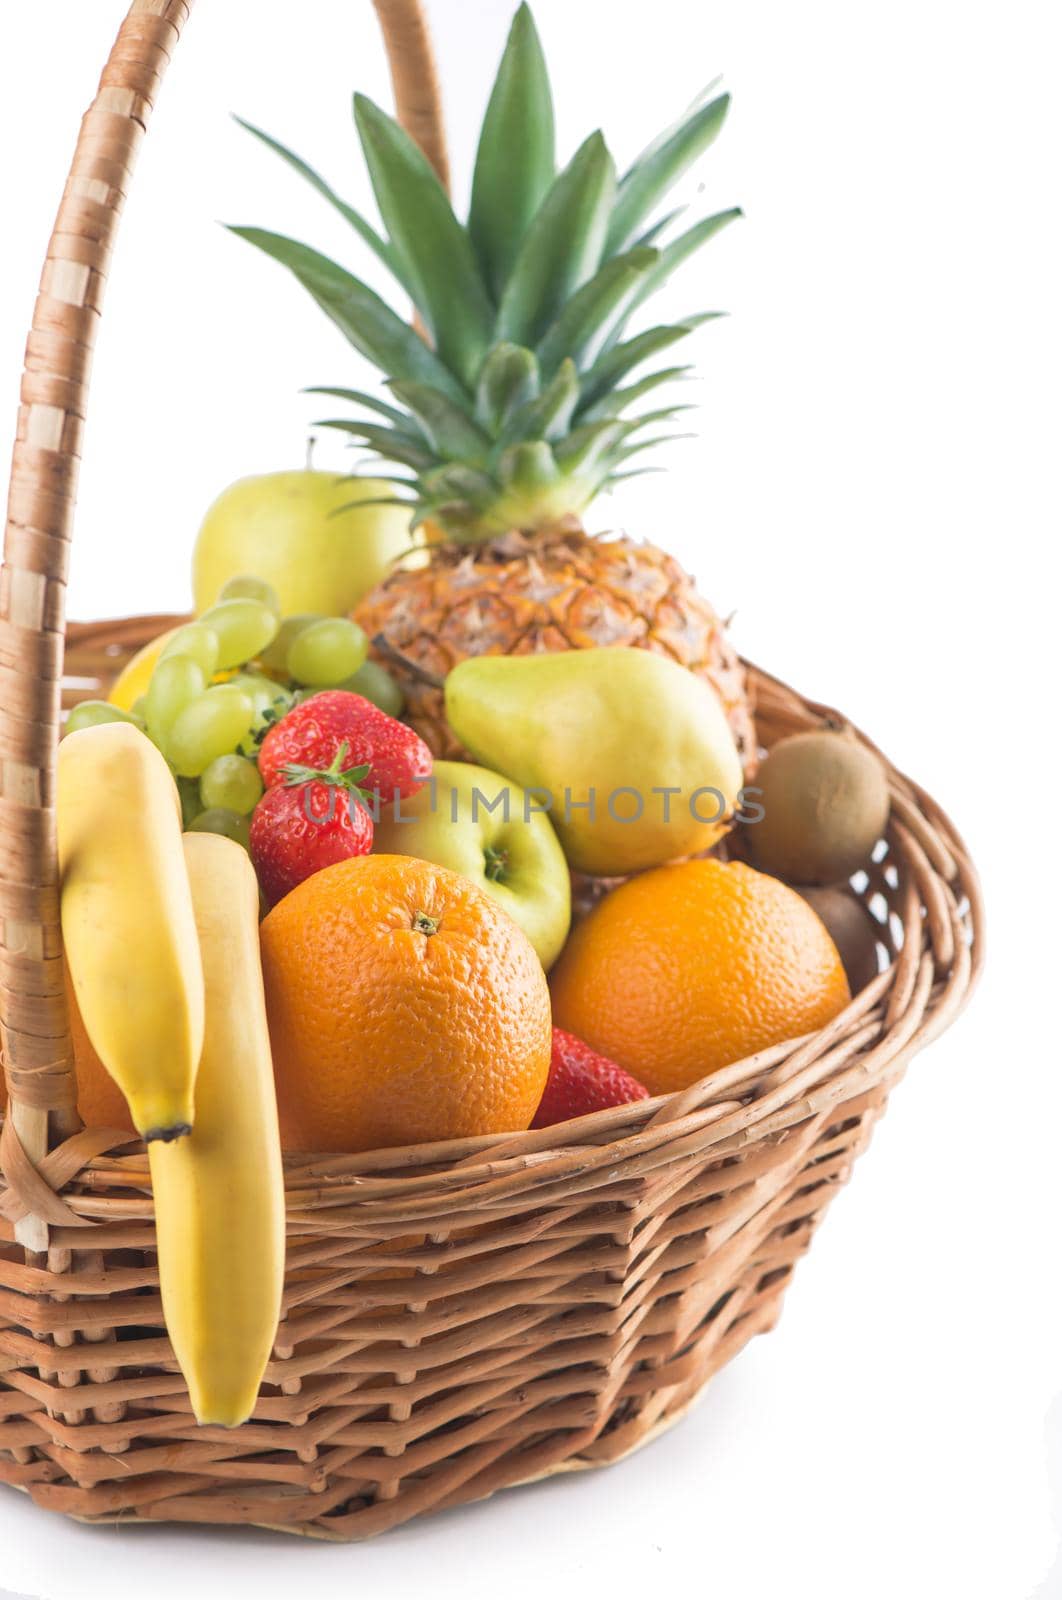 Fresh fruit in the basket against a white